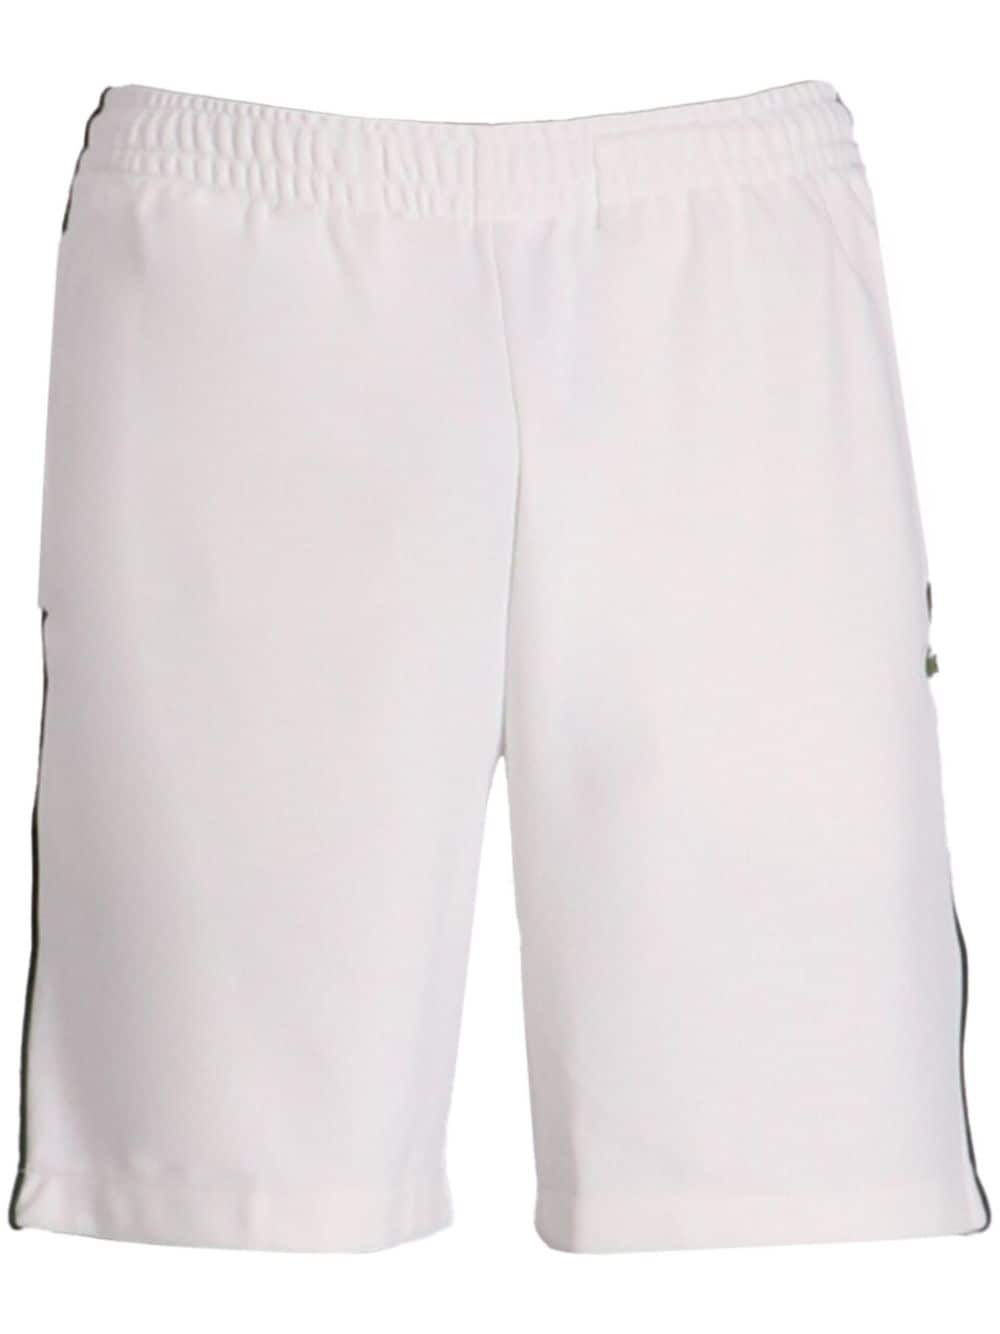 Lacoste Stripe Embroidered Track Shorts In White